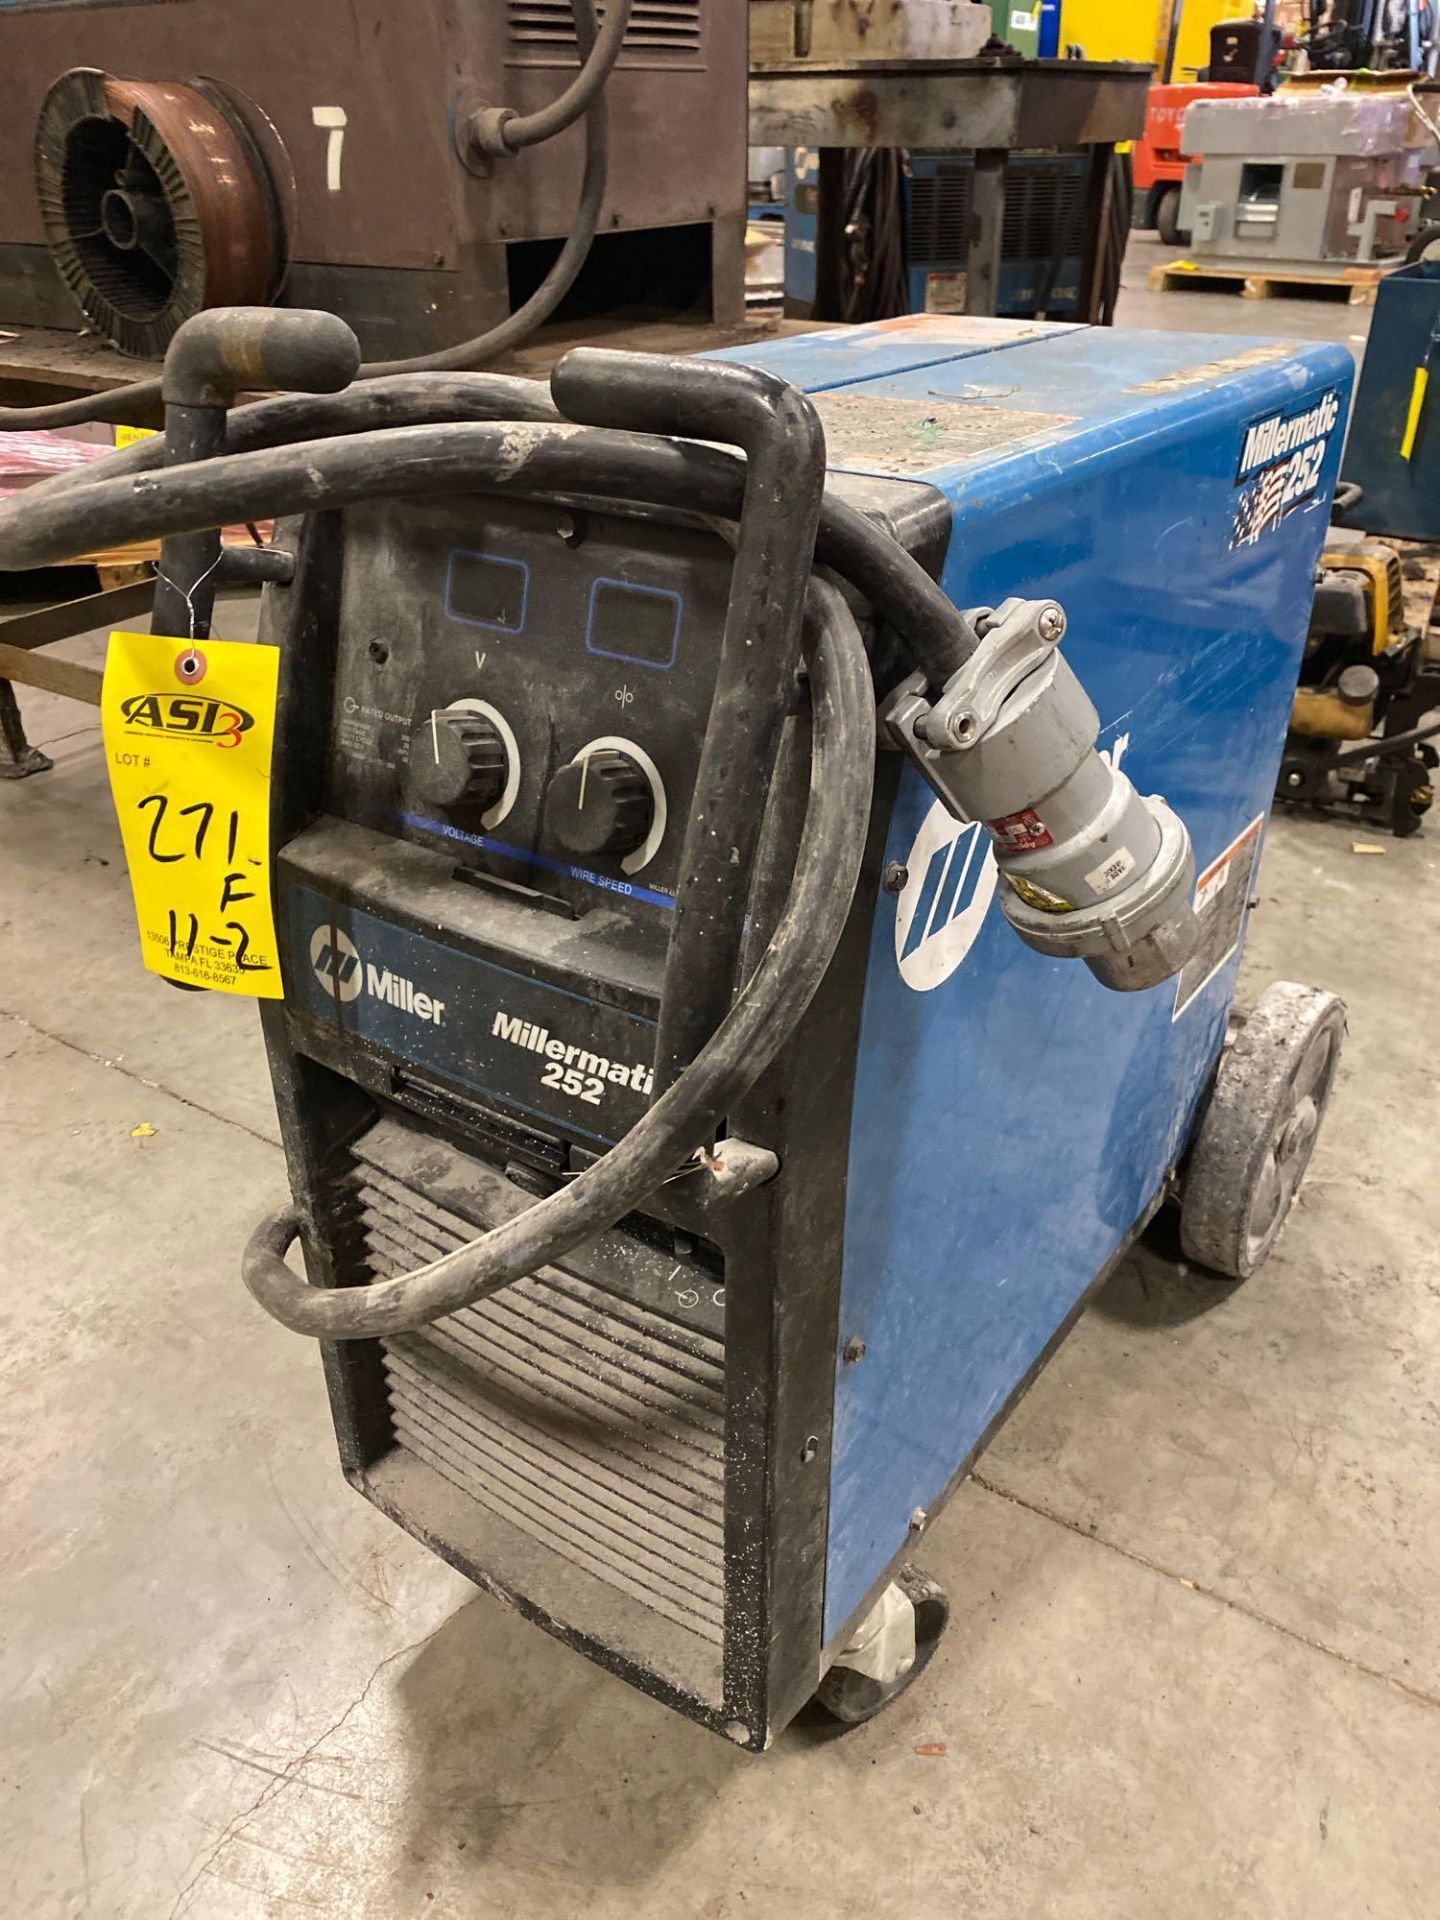 MILLERMATIC 252 WELDER, BUILT IN WIRE FEEDER, RUNS AND OPERATES